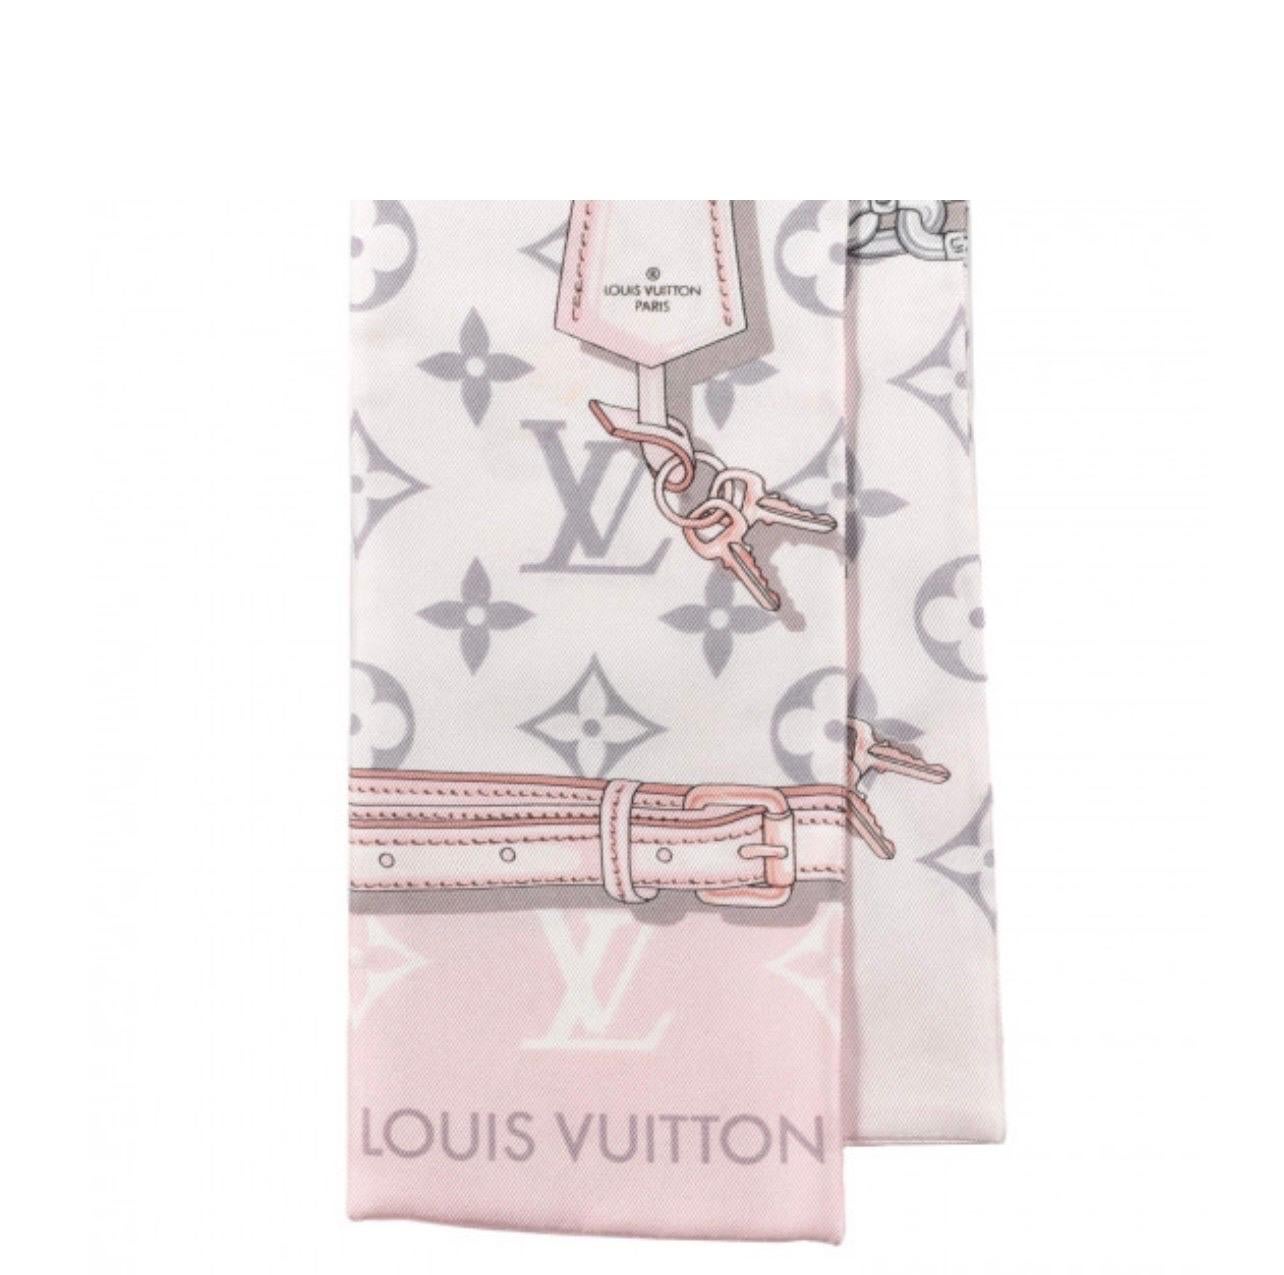 Brand New Louis Vuitton Rose Ballerine Monogram Giant Escale Silk Square Scarf , Has Never Been Worn. Comes In Original Box. All tags are attched 
Take home this beautiful monogram Scarf for gift as it comes in original box

Size

Length: 35